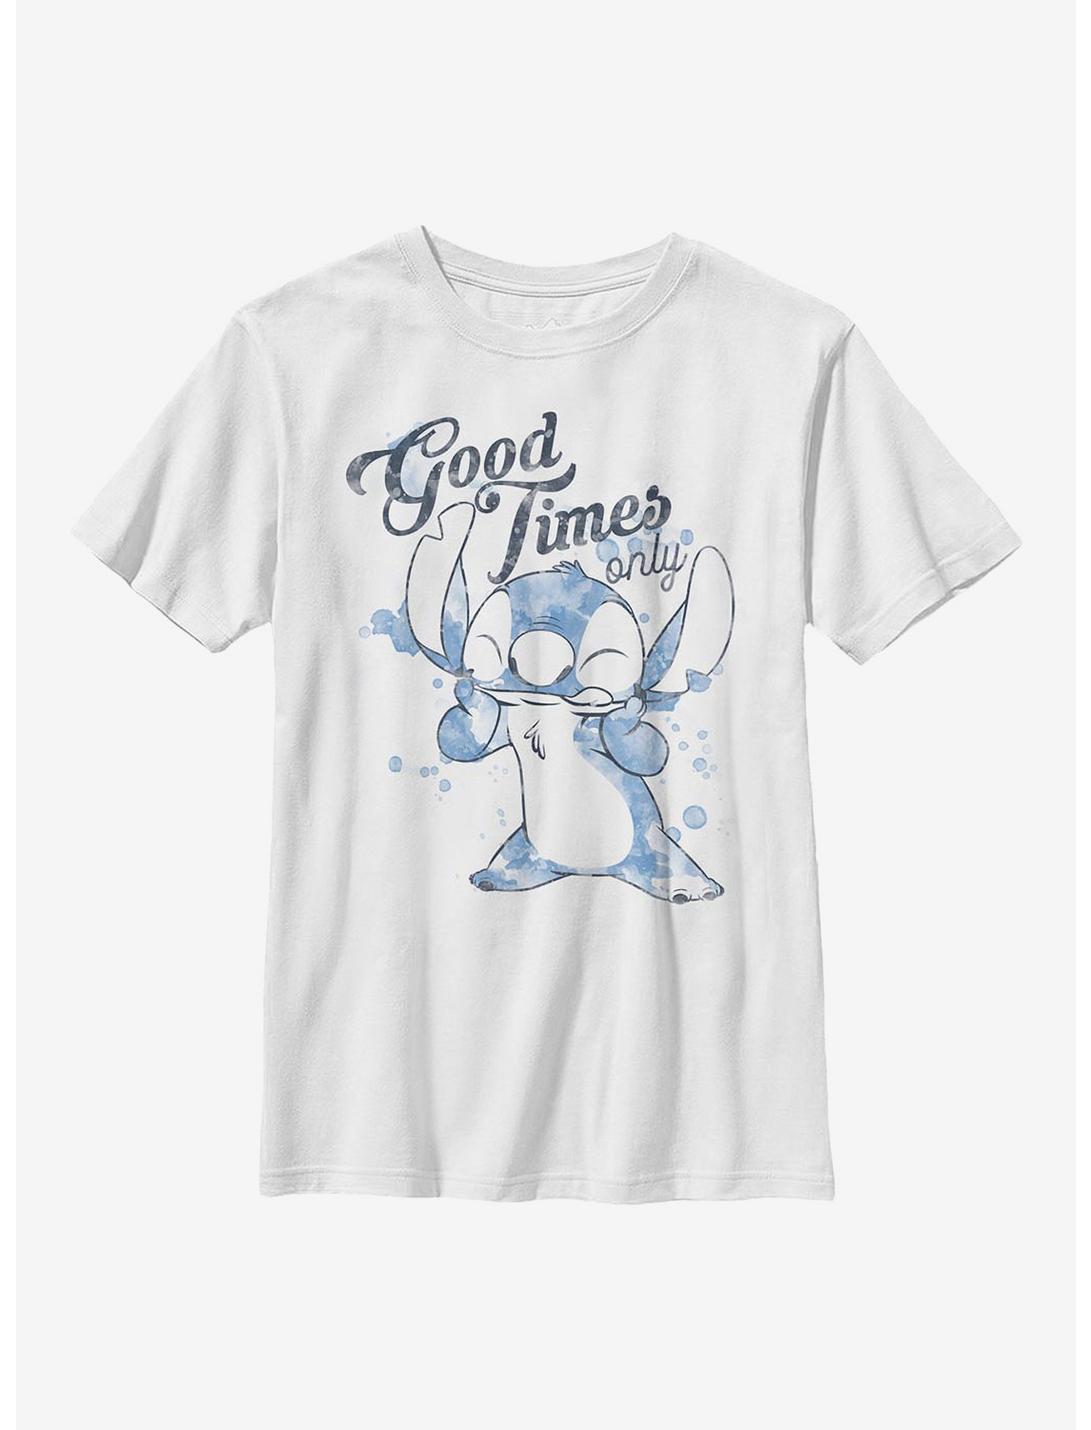 Disney Lilo And Stitch Good Times Youth T-Shirt, WHITE, hi-res